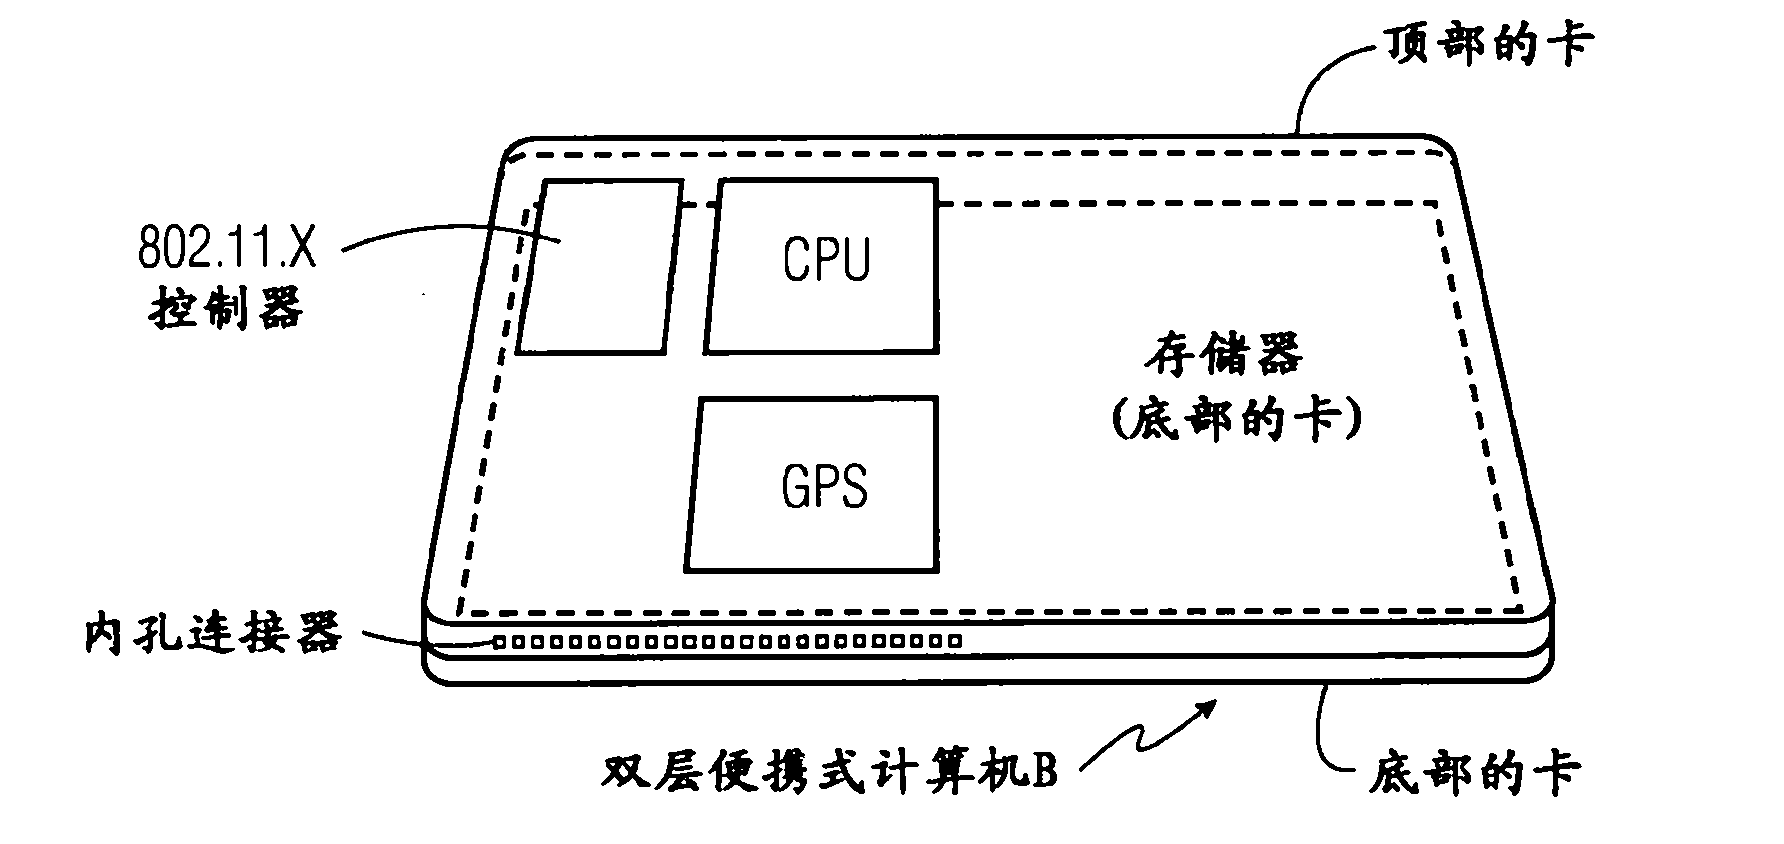 Portable computing system, apparatus and method